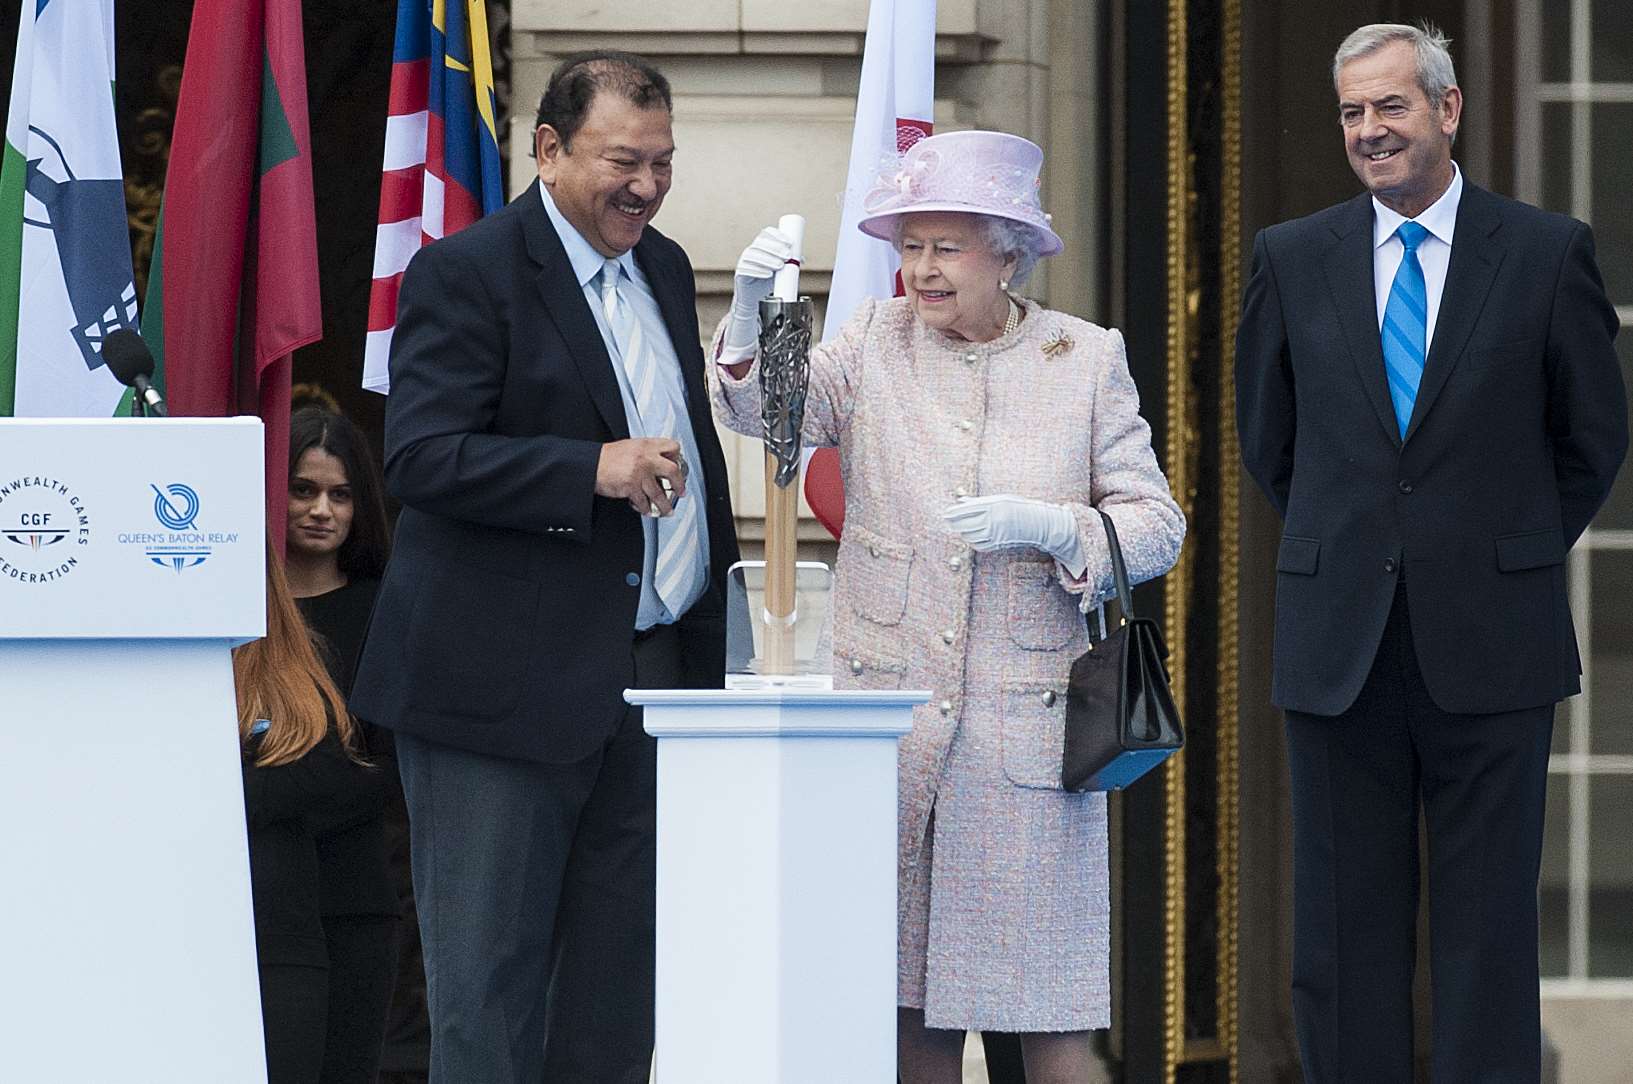 The Queen lights the baton at the start of its journey